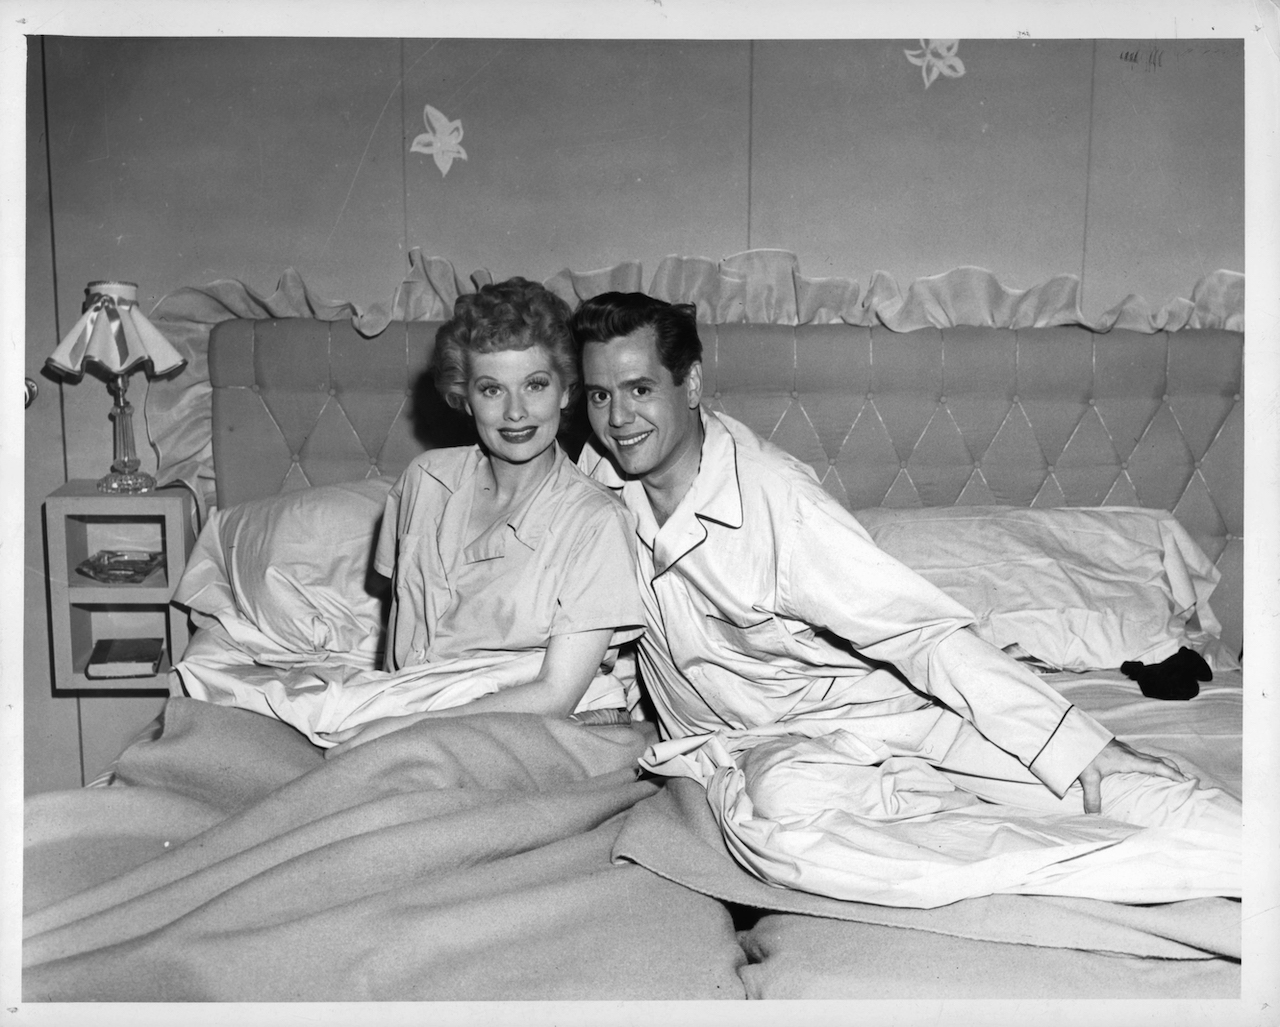 Lucille Ball and Desi Arnaz in bed in pilot episode of television series 'I Love Lucy